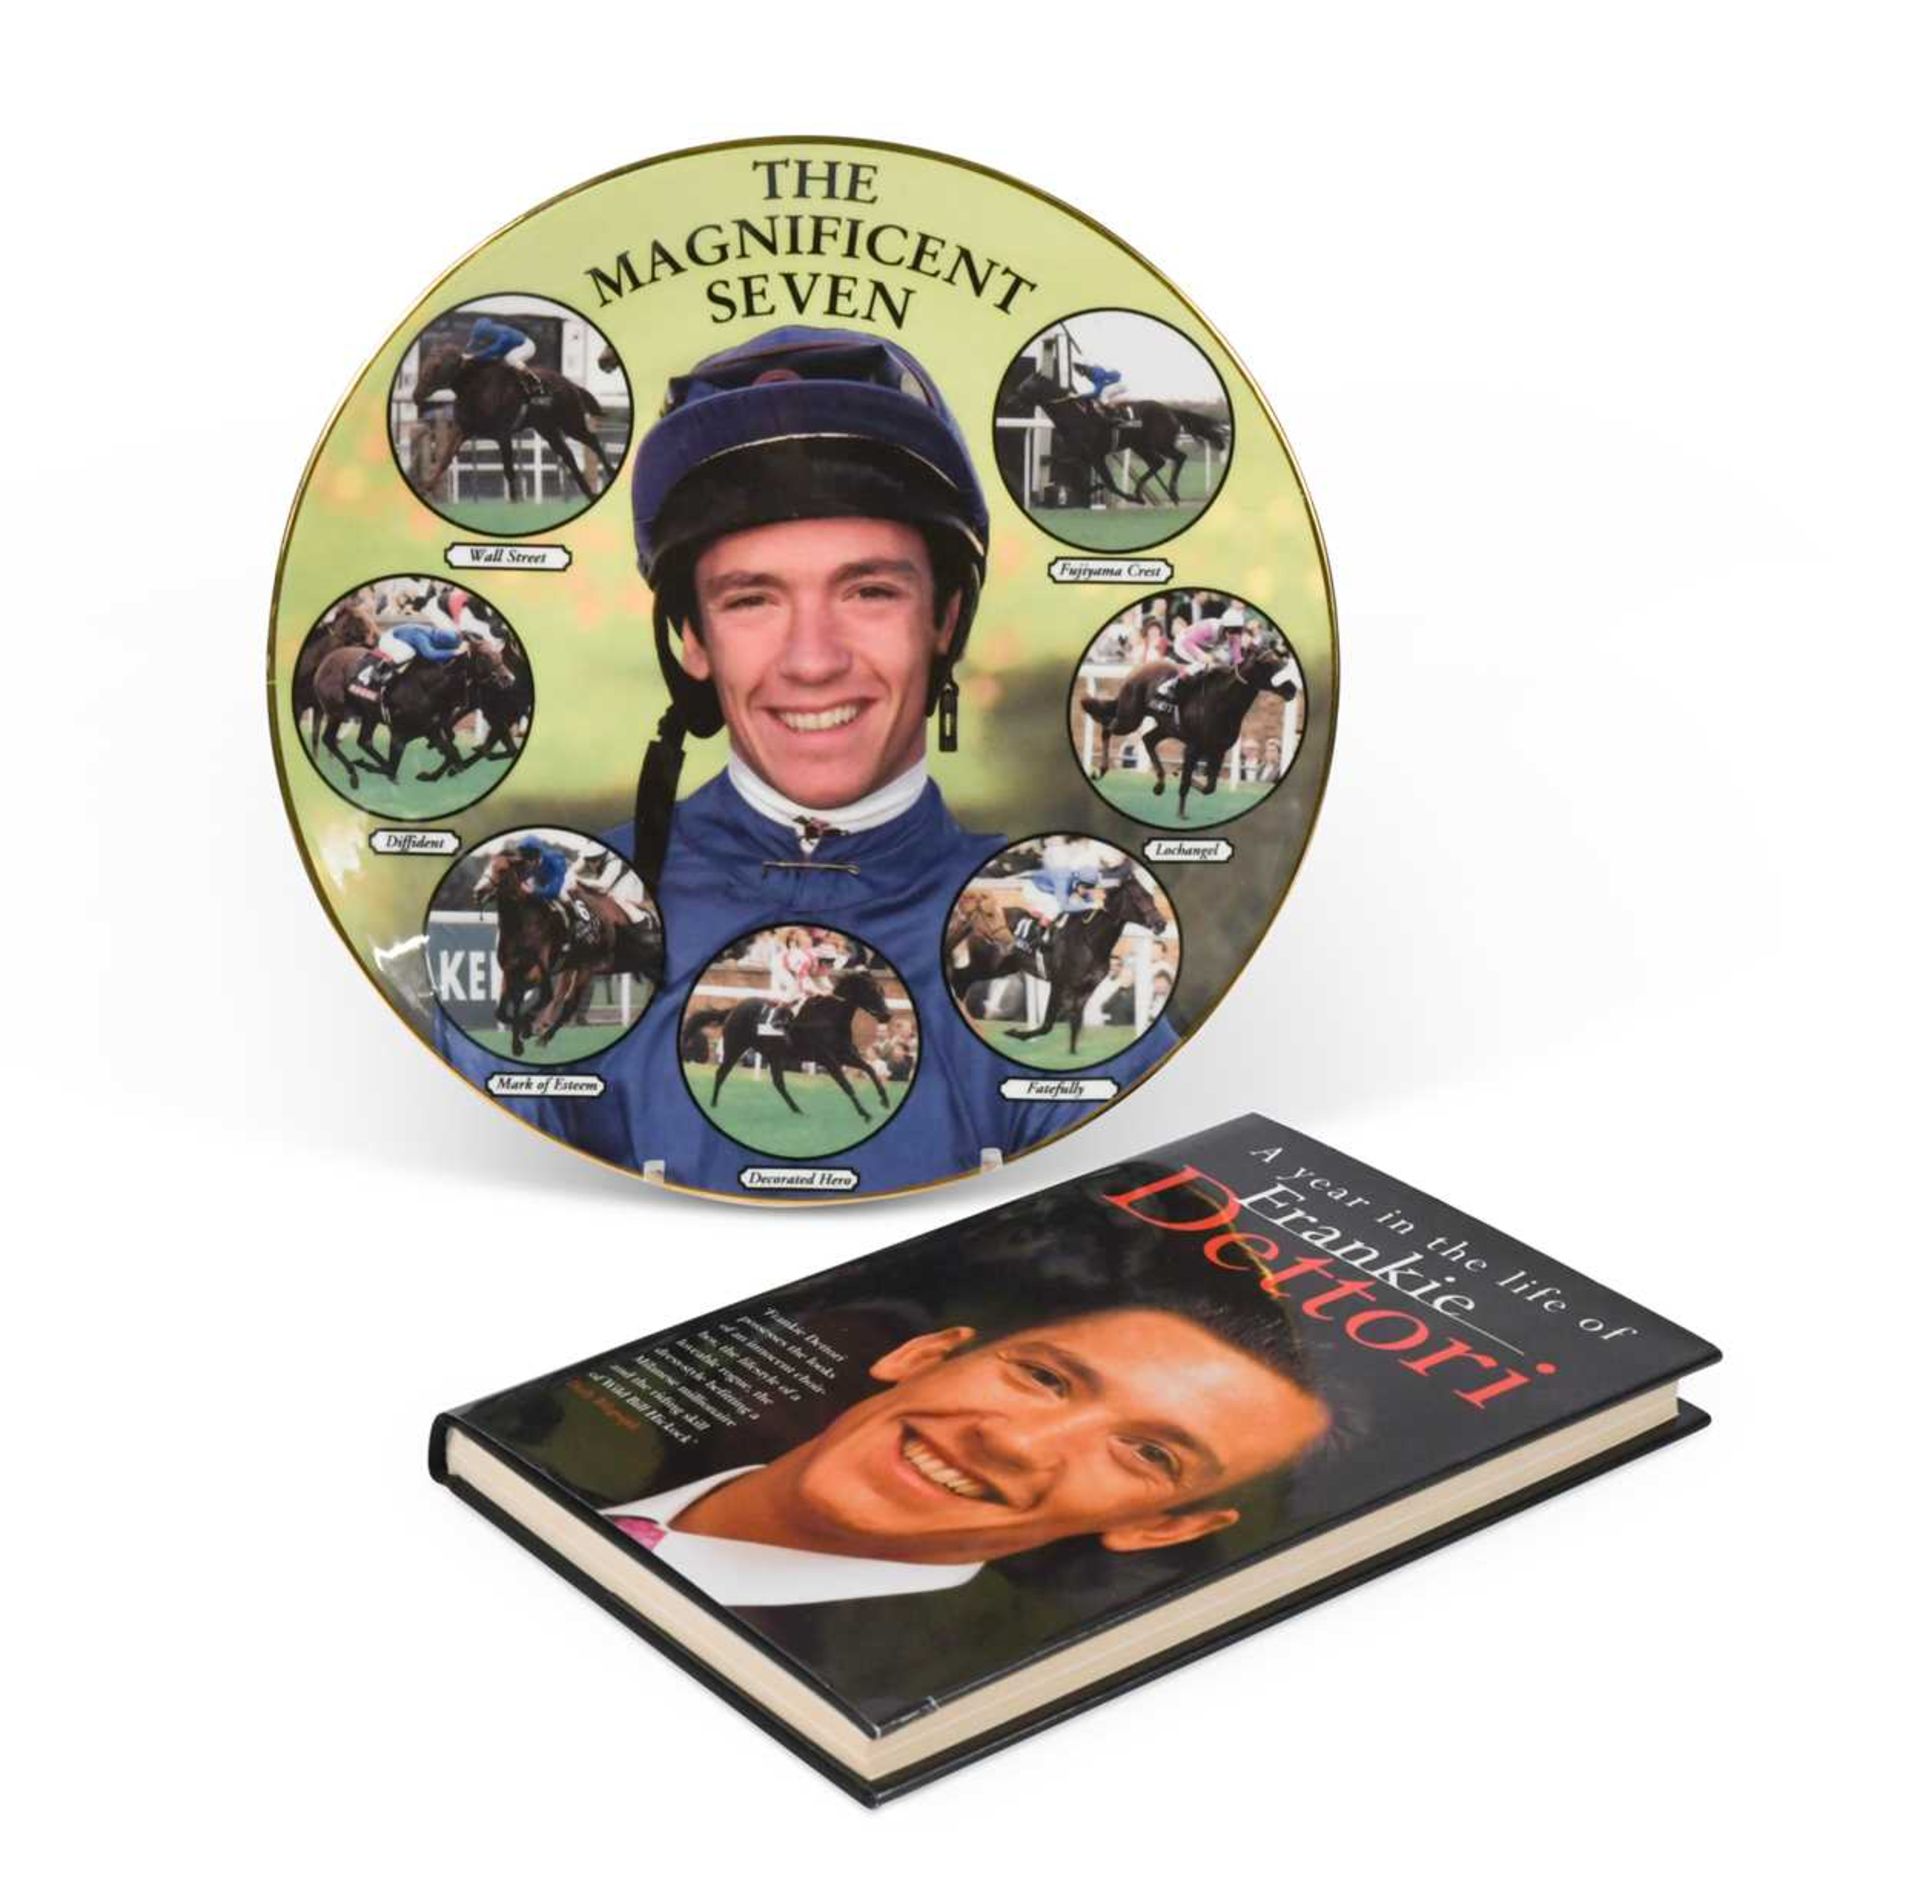 A Frankie Dettori signed hardback book titled 'A Year in the Life of Frankie Dettori',